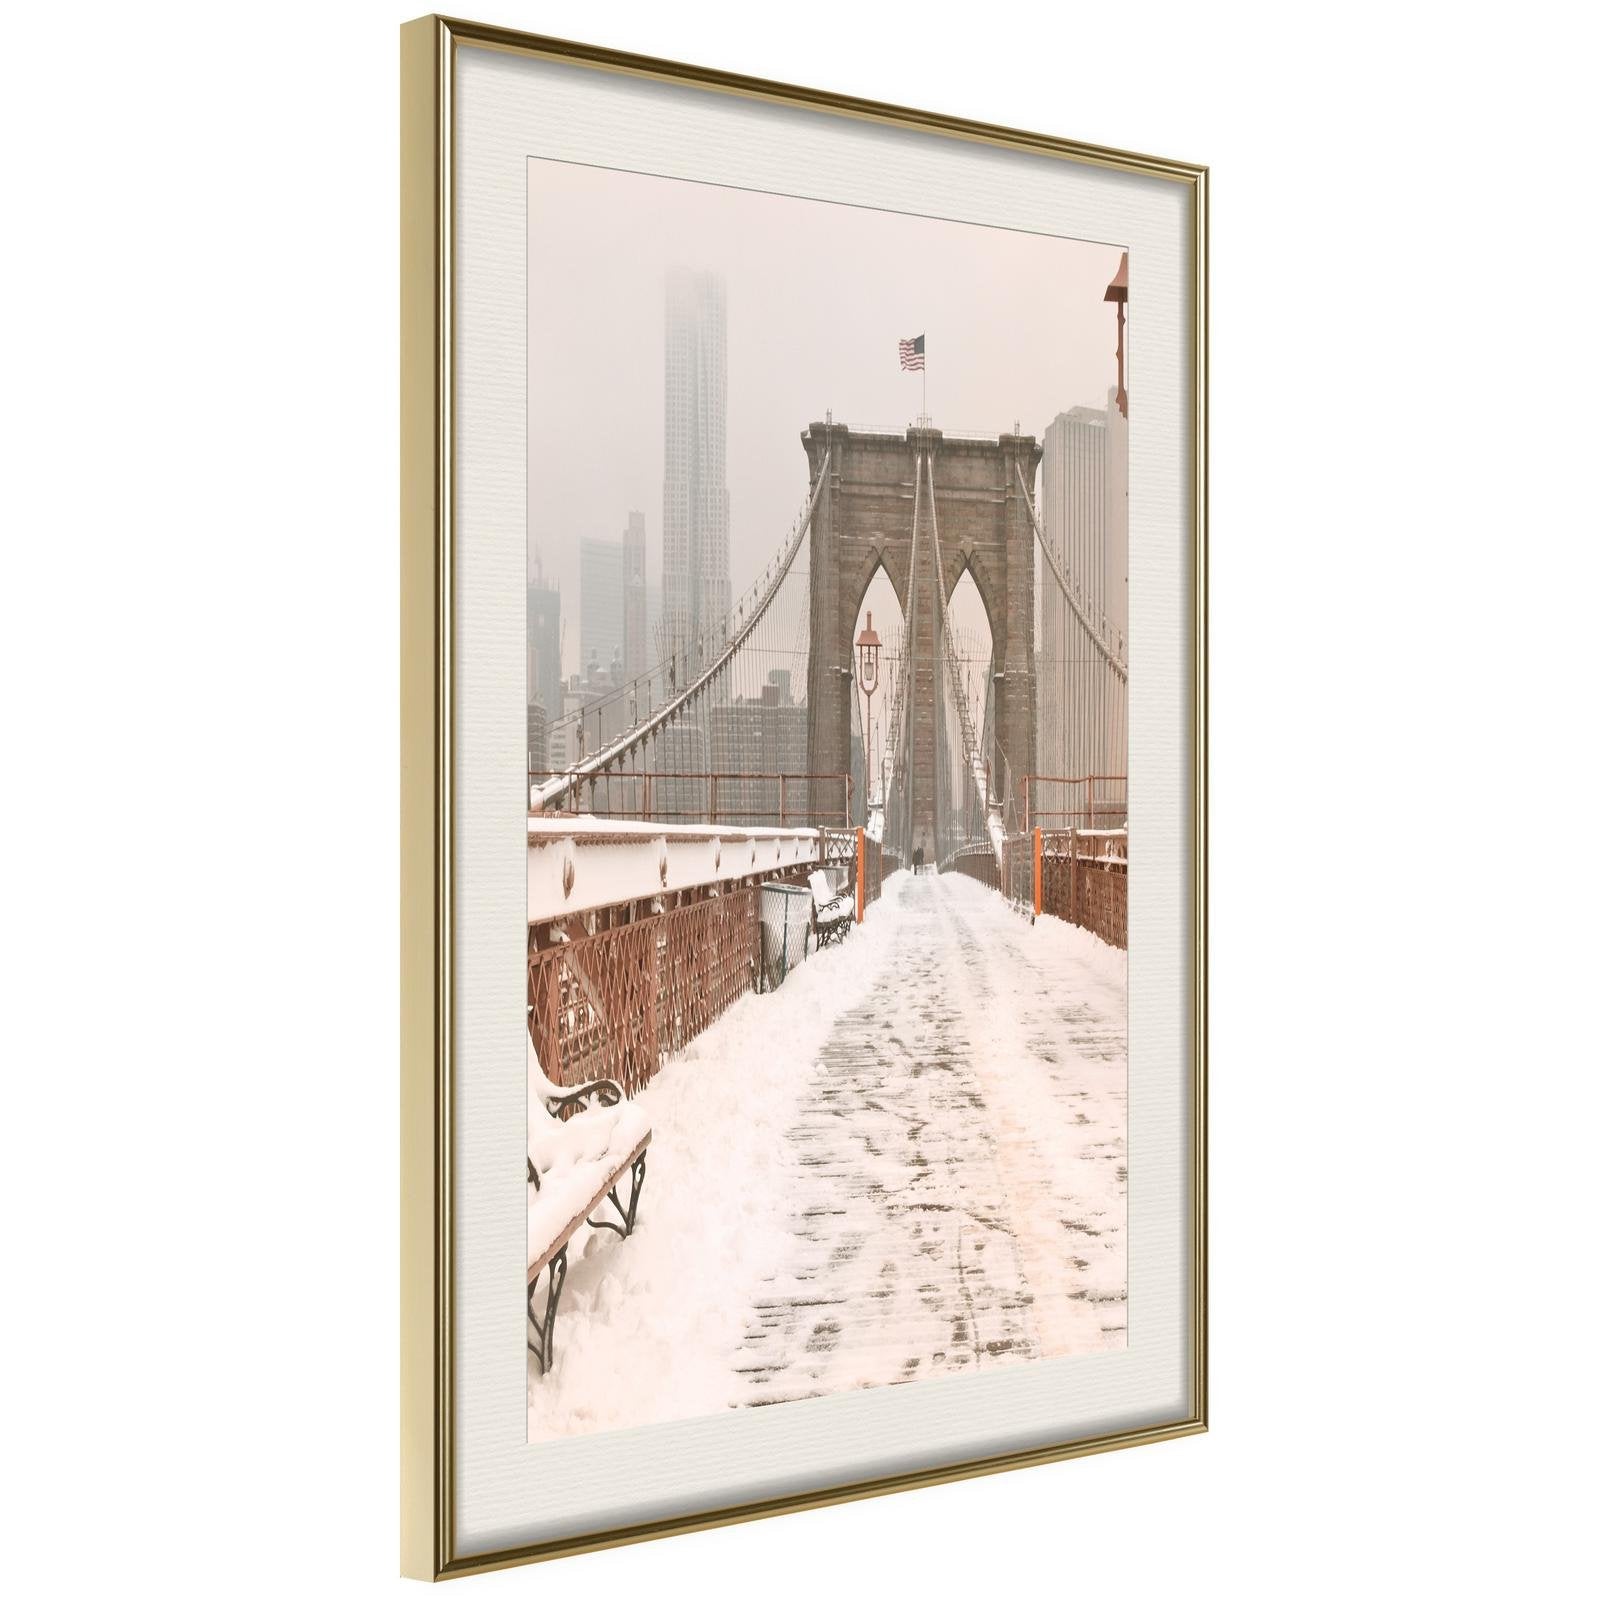 Inramad Poster / Tavla - Winter in New York-Poster Inramad-Artgeist-20x30-Guldram med passepartout-peaceofhome.se